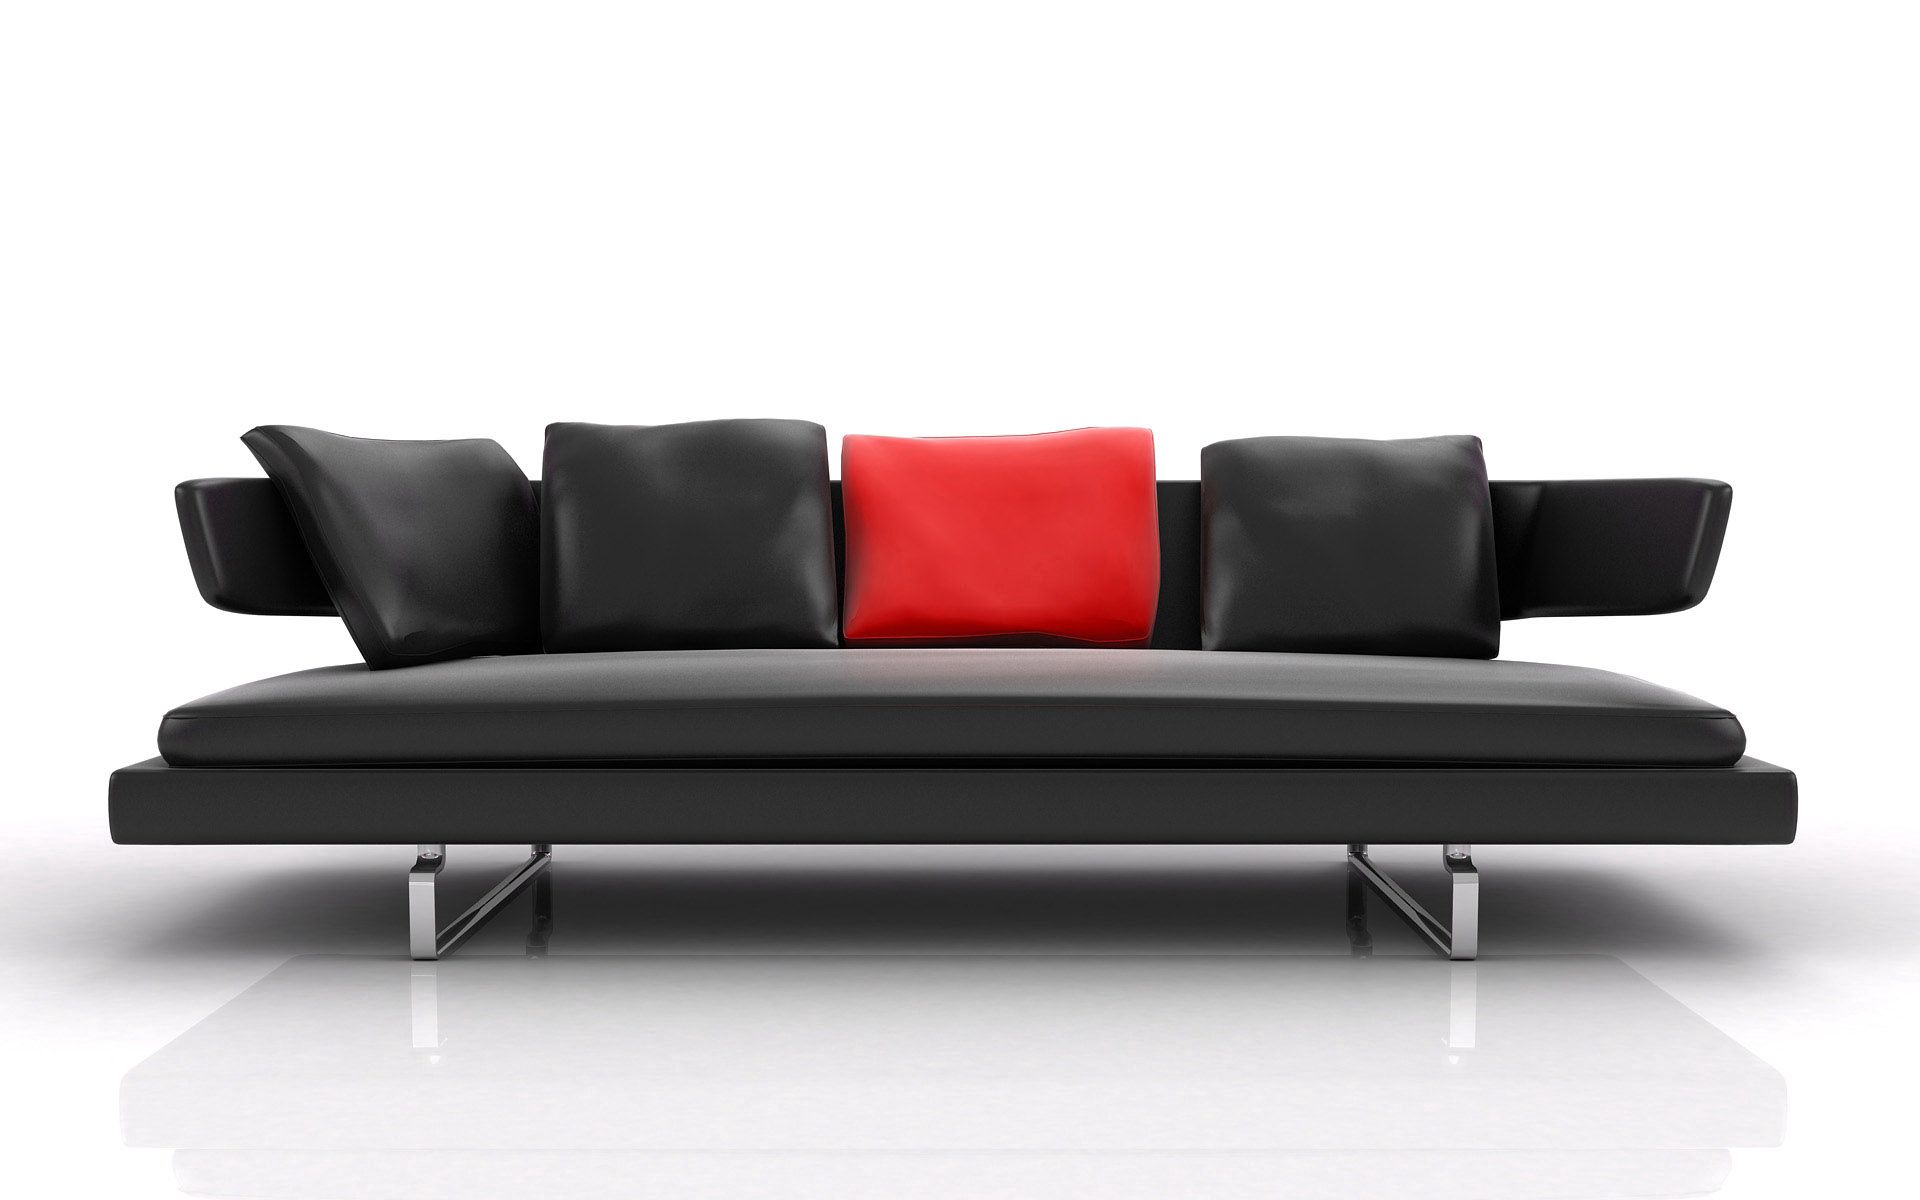 furniture, miscellanea, miscellaneous, style, sofa, modern, up to date, cushions, pillows